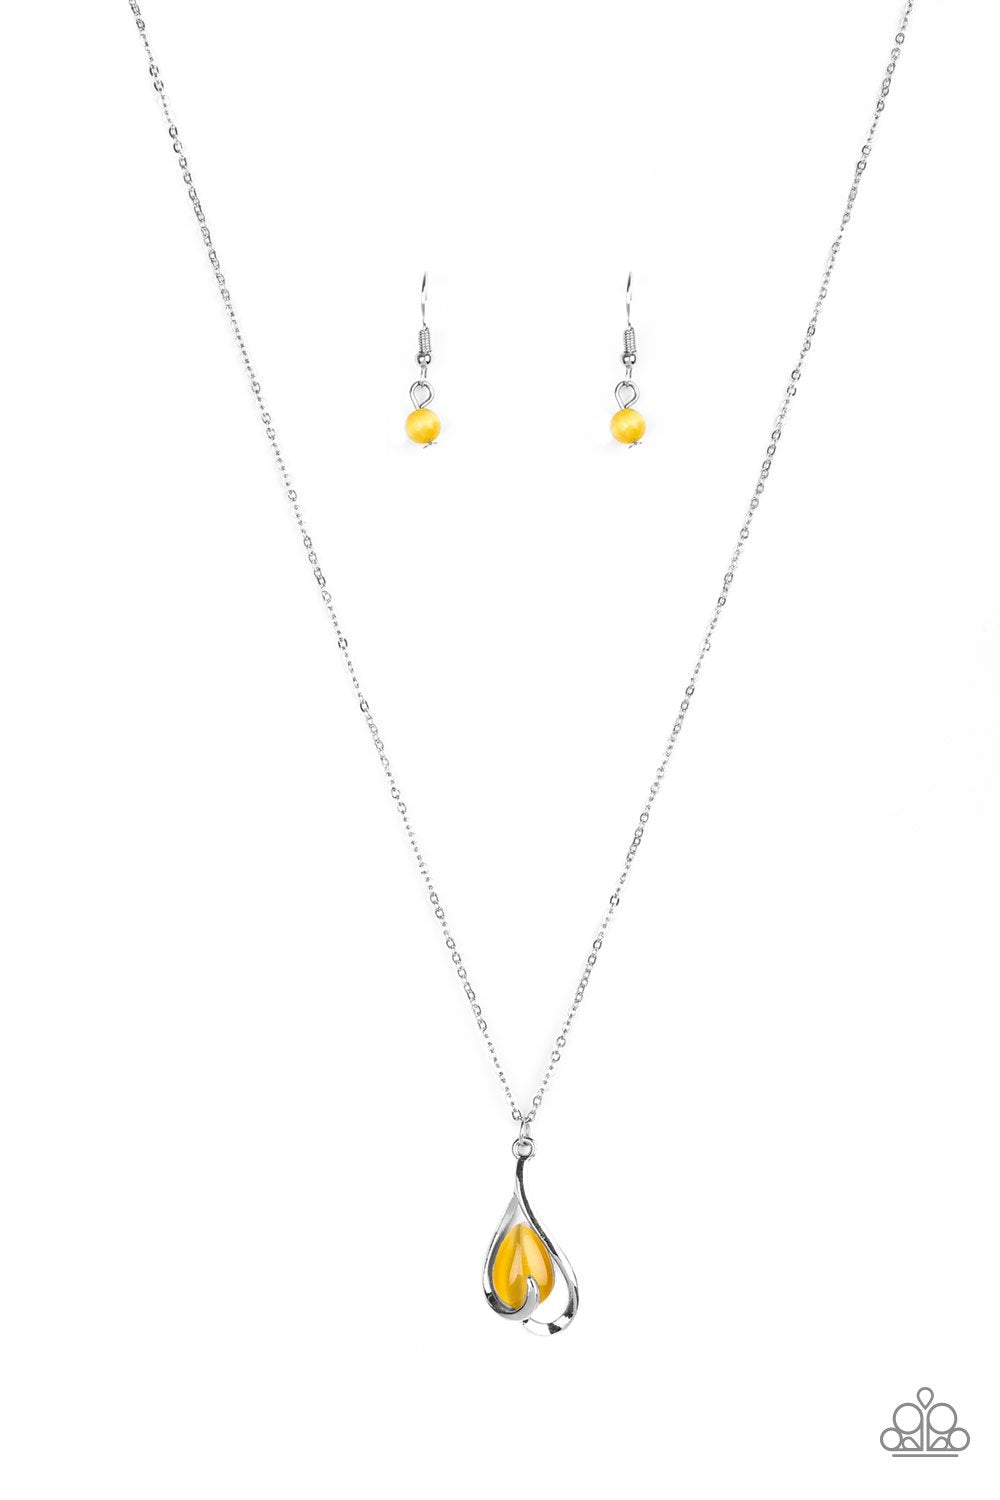 Tell Me A Love Story - Yellow Necklace